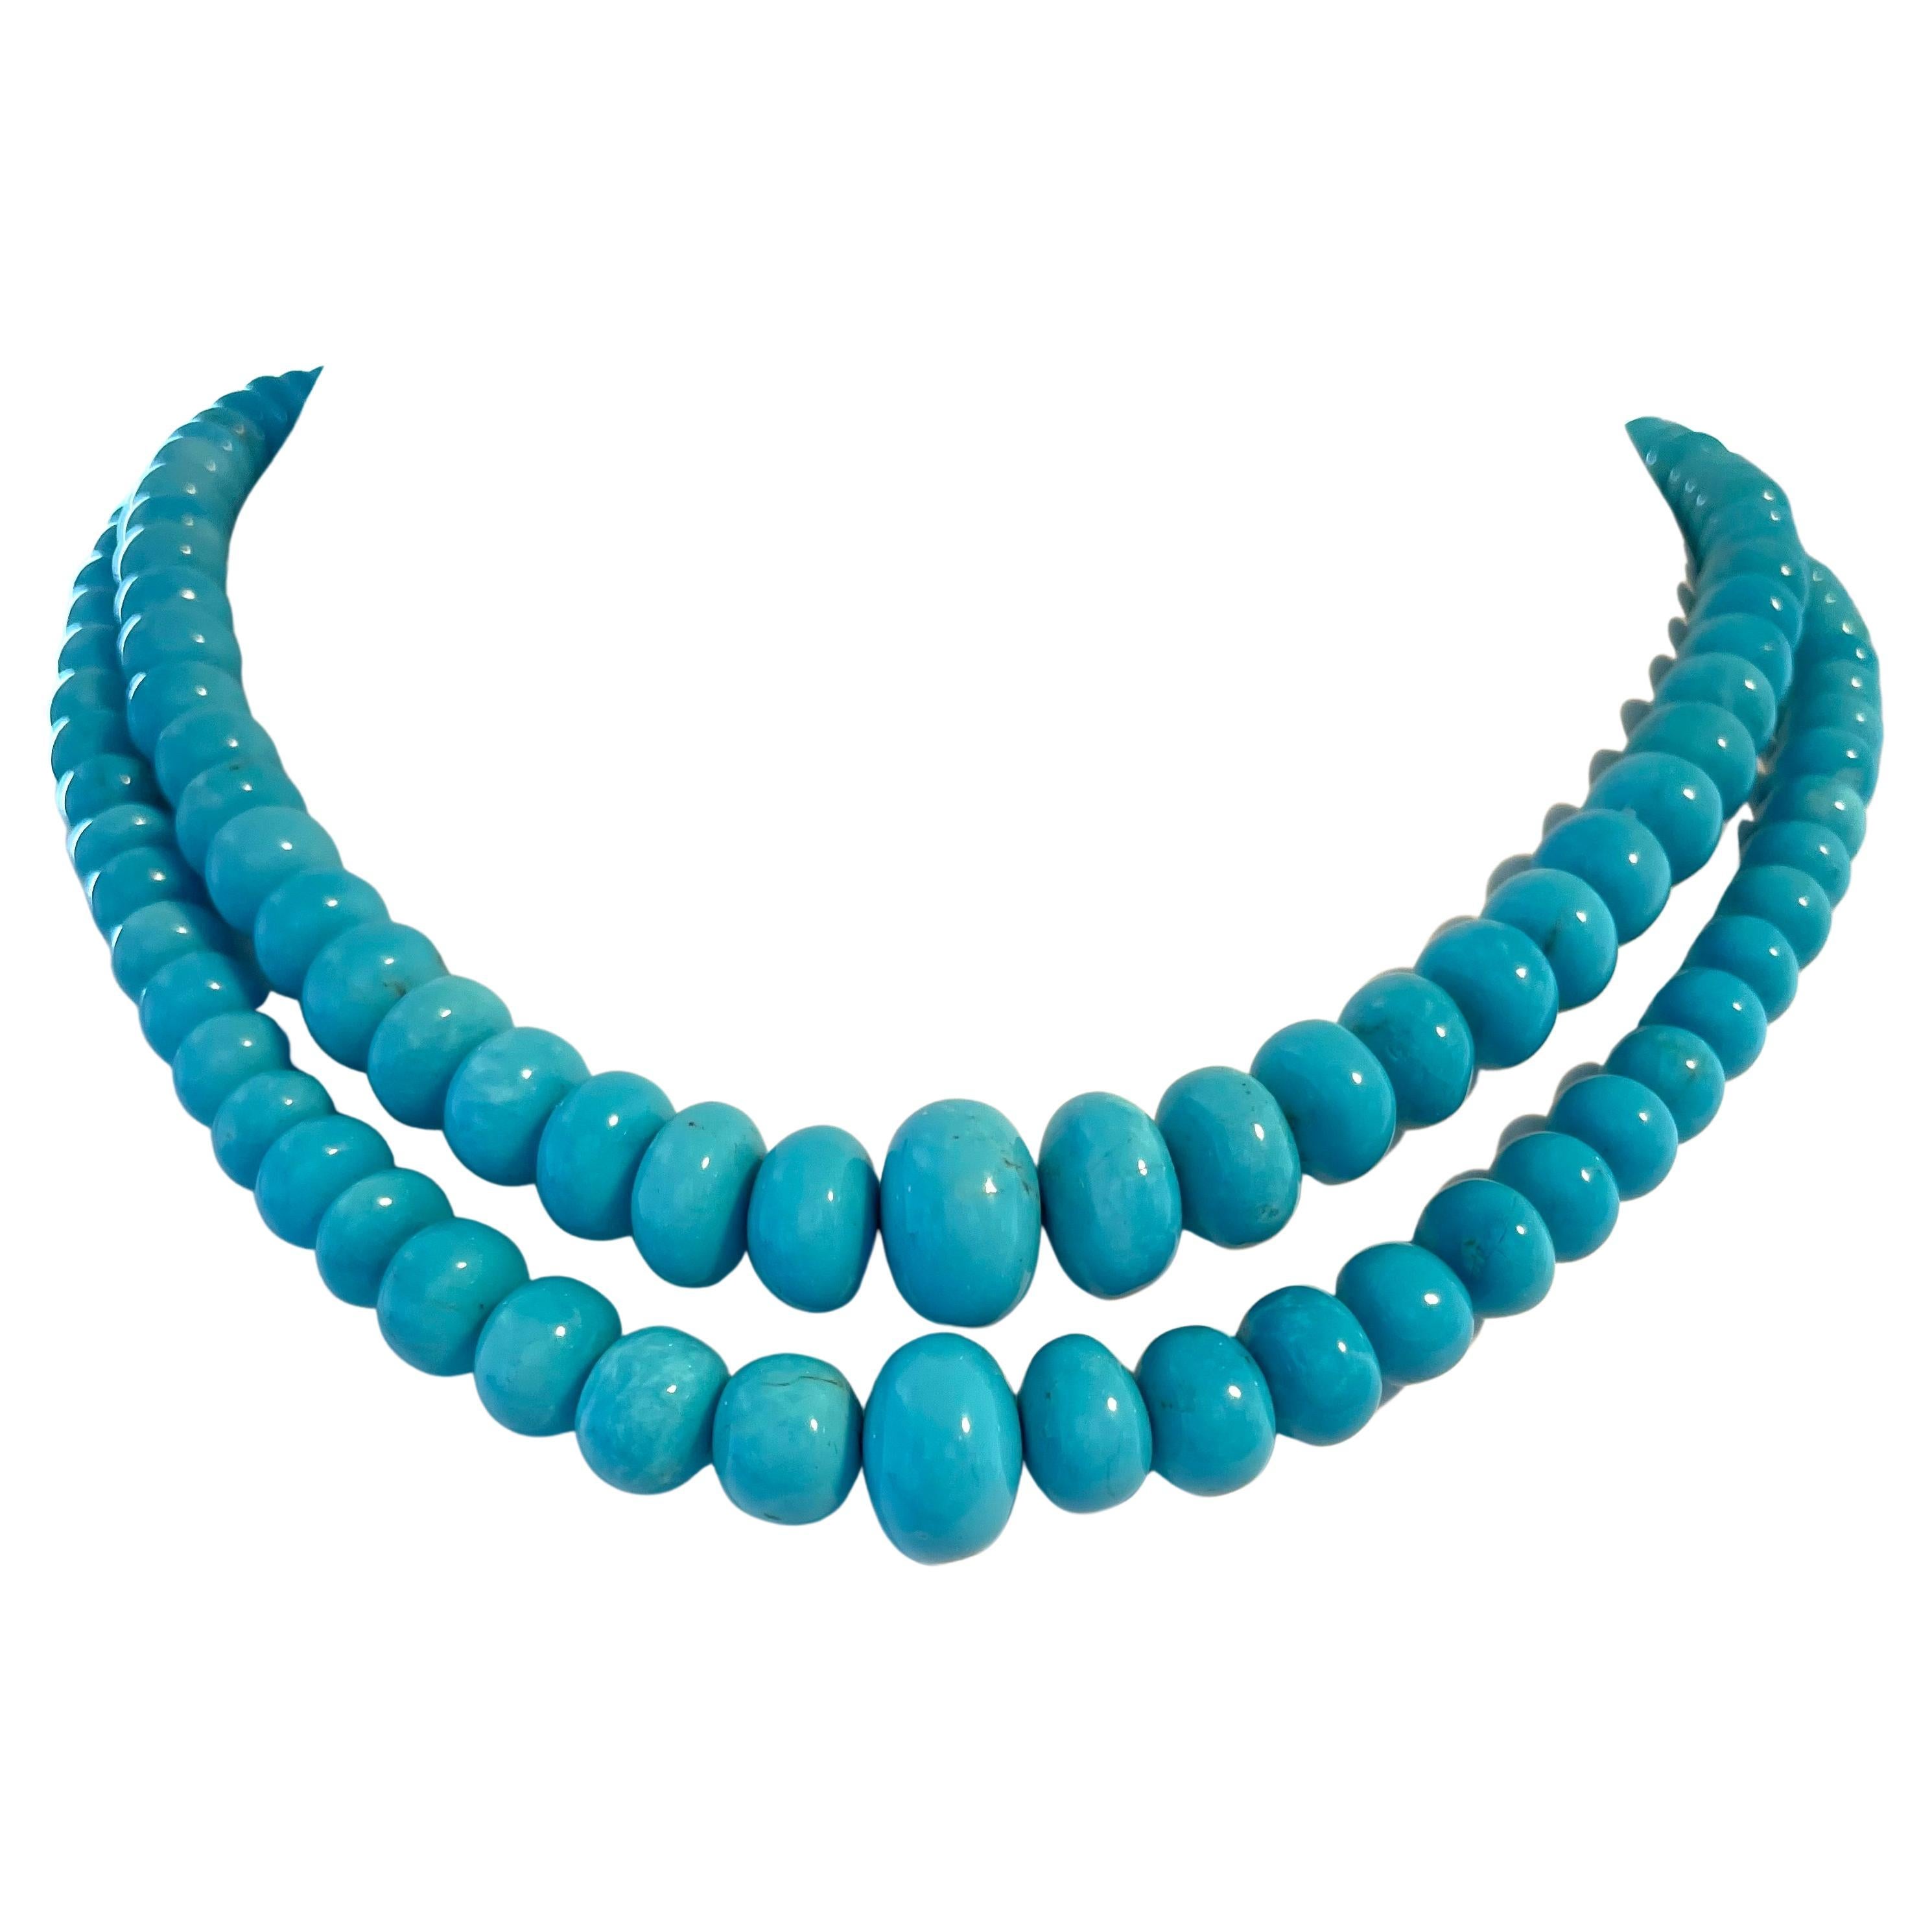 Details about   WOMENS FAUX PEARL TURQUOISE STONE STRAND JEWELRY Necklace 35" LONG 17.5" DROP 